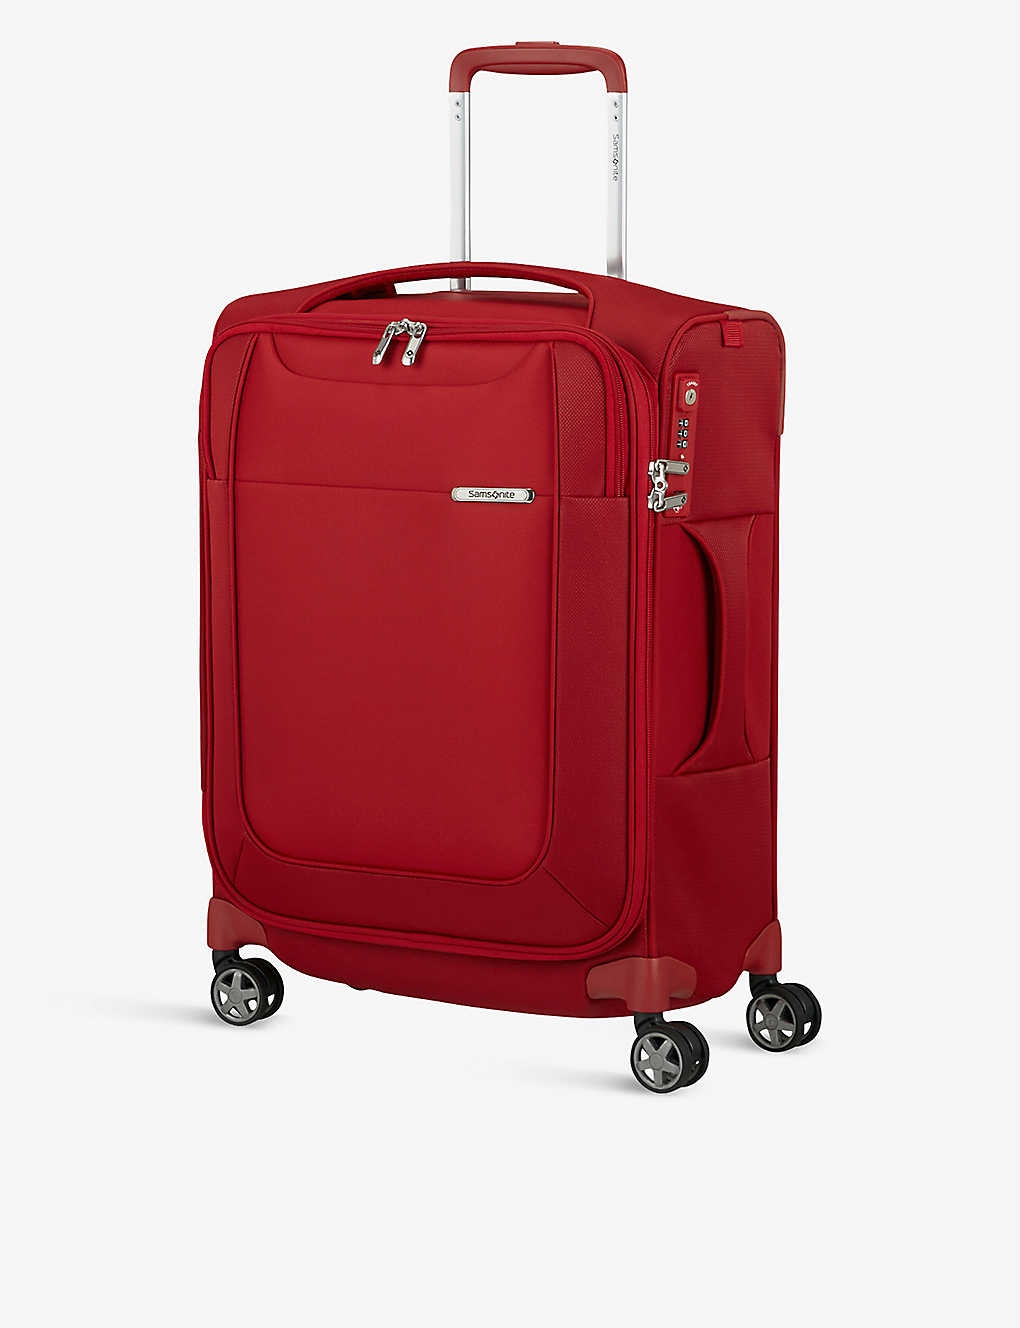 Samsonite Spinner Branded Woven Suitcase In Chili Red